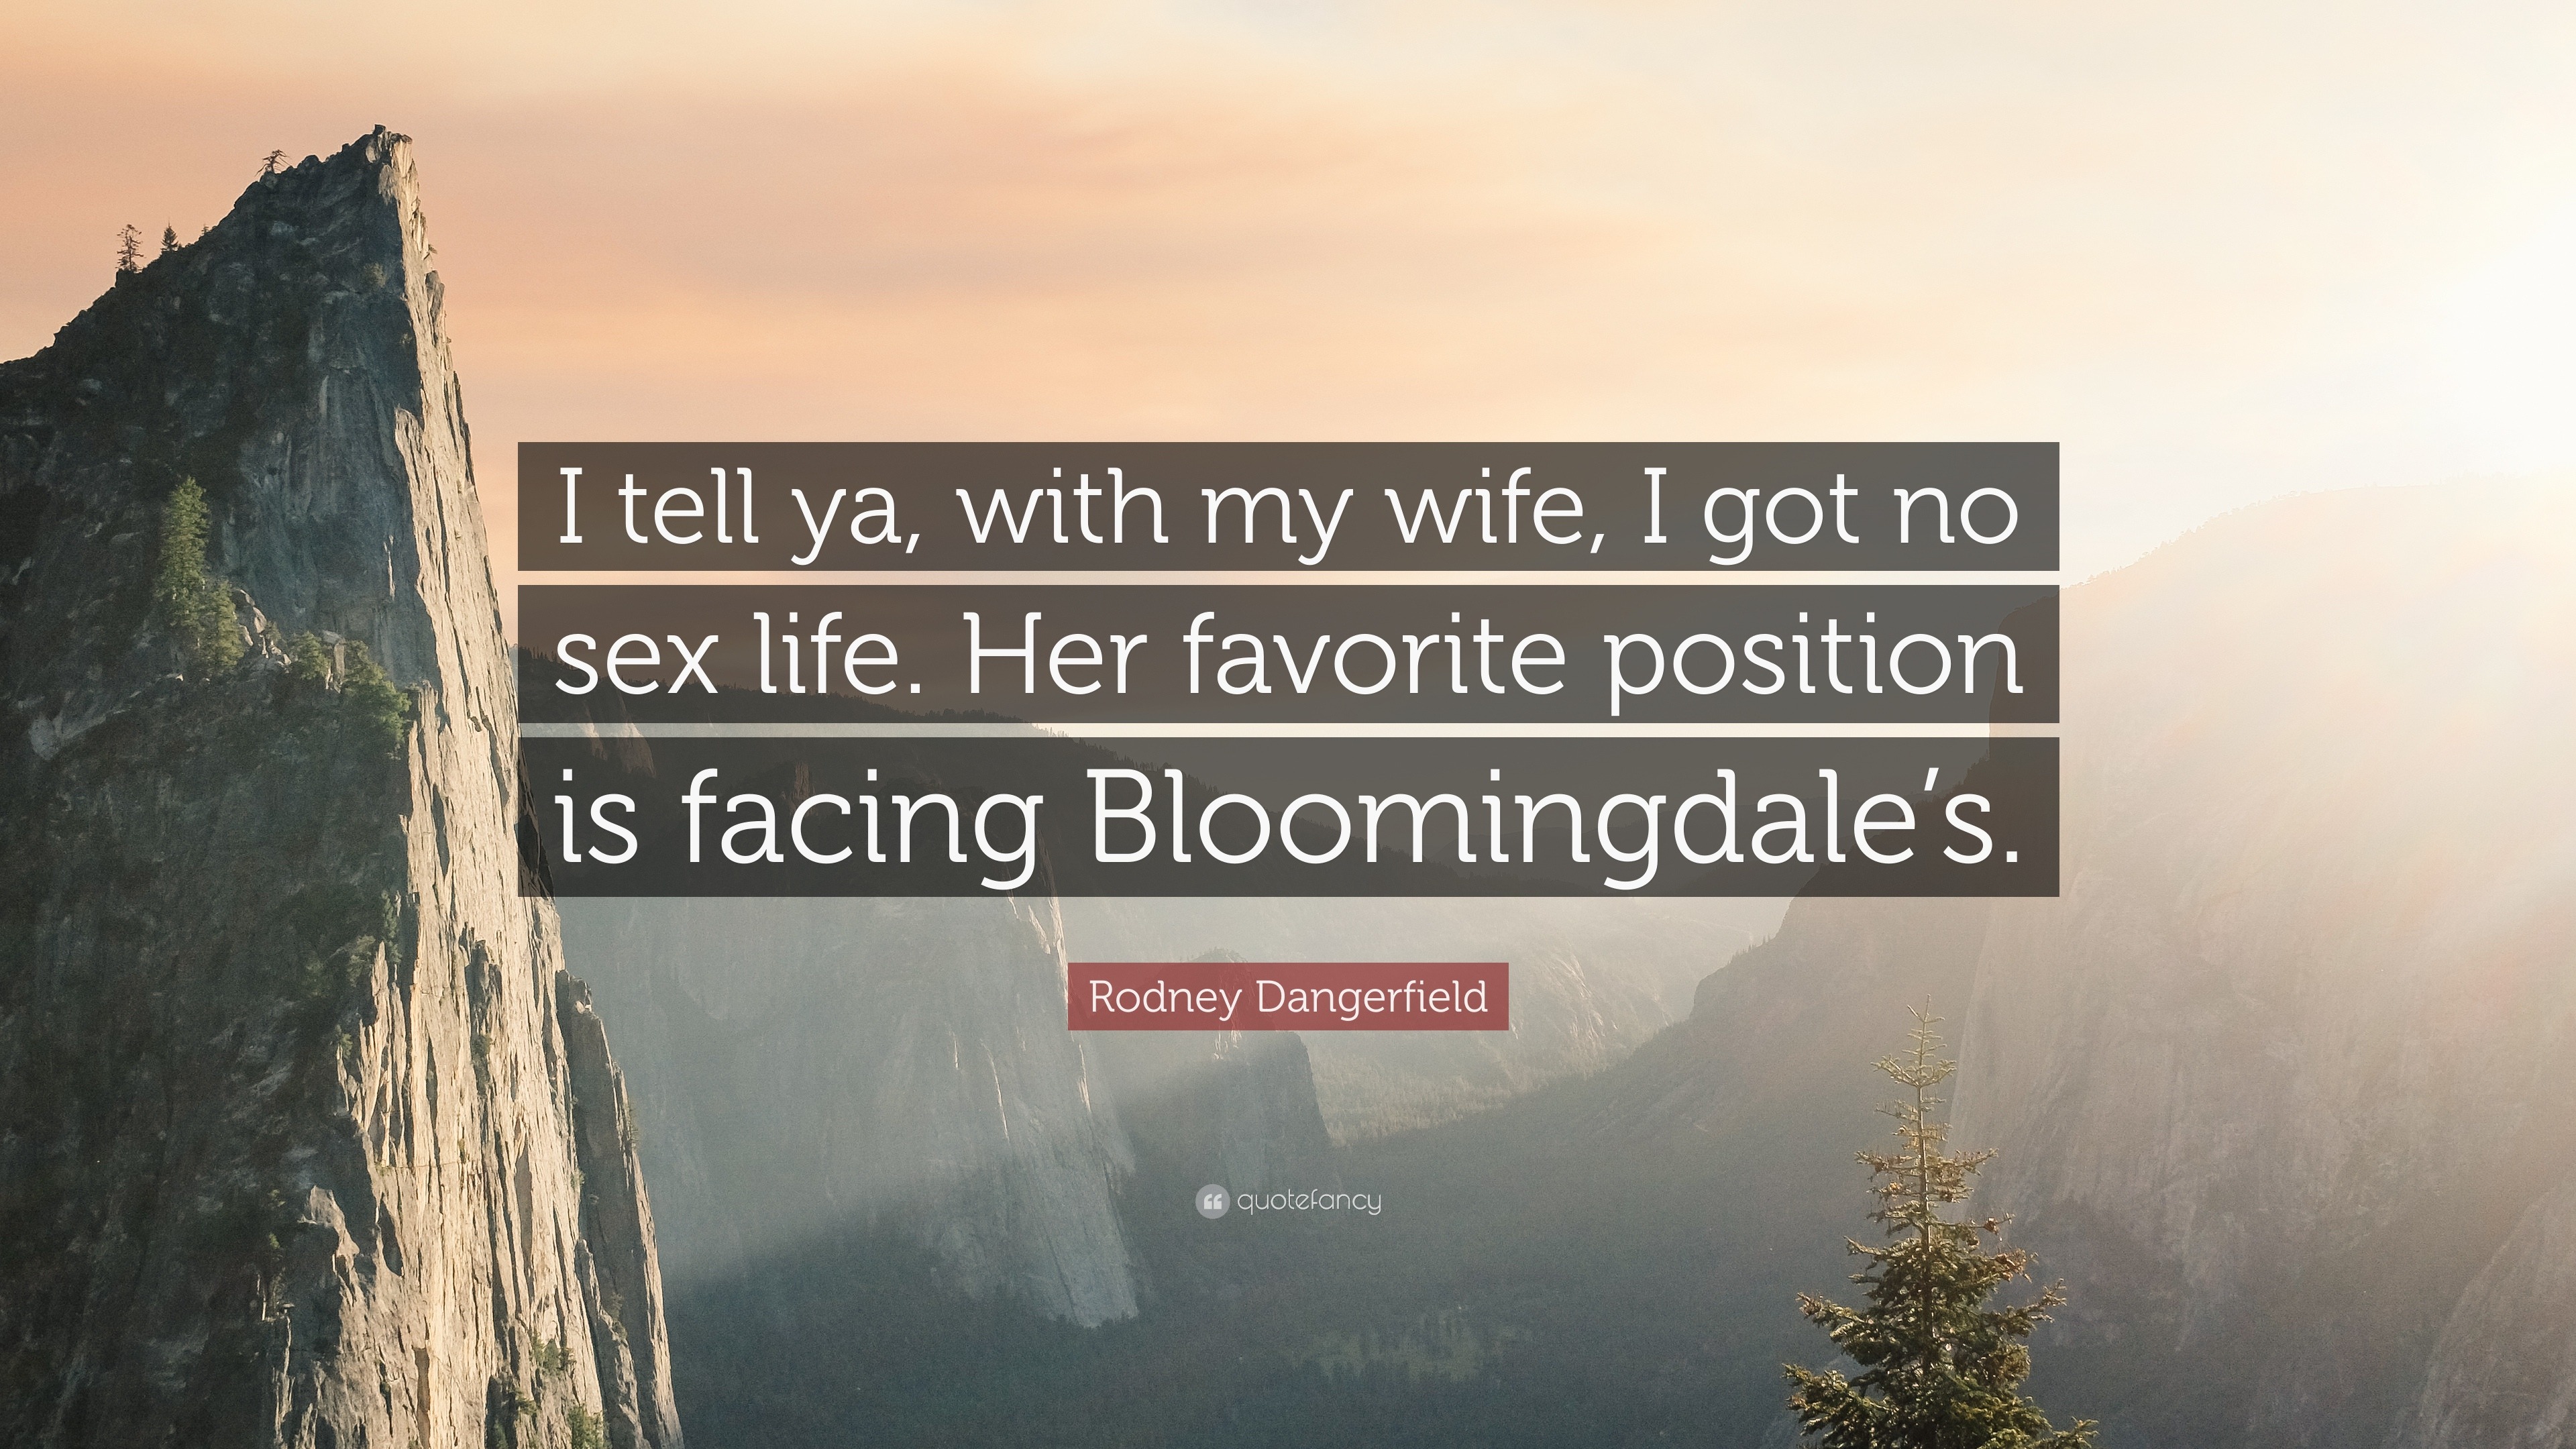 Rodney Dangerfield Quote “I tell ya, with my wife, I got no sex life photo image